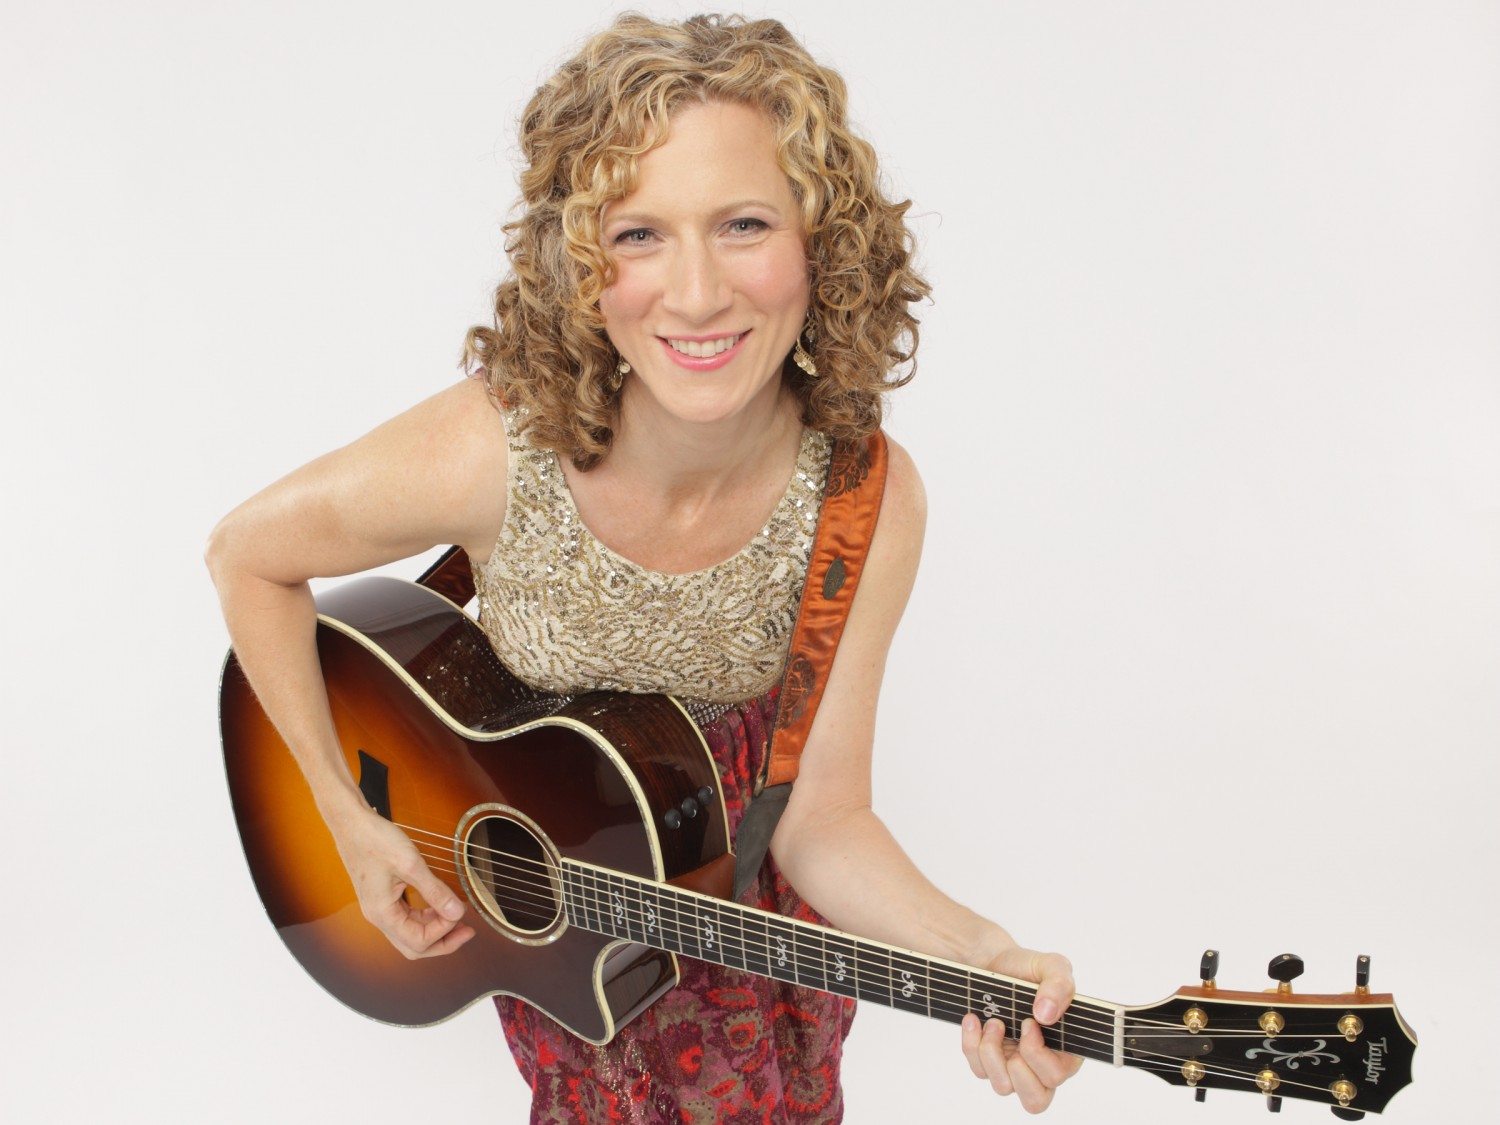 Laurie Berkner to headline a NYC cruise on Jun. 25, talks to Downtown Mom (TM)